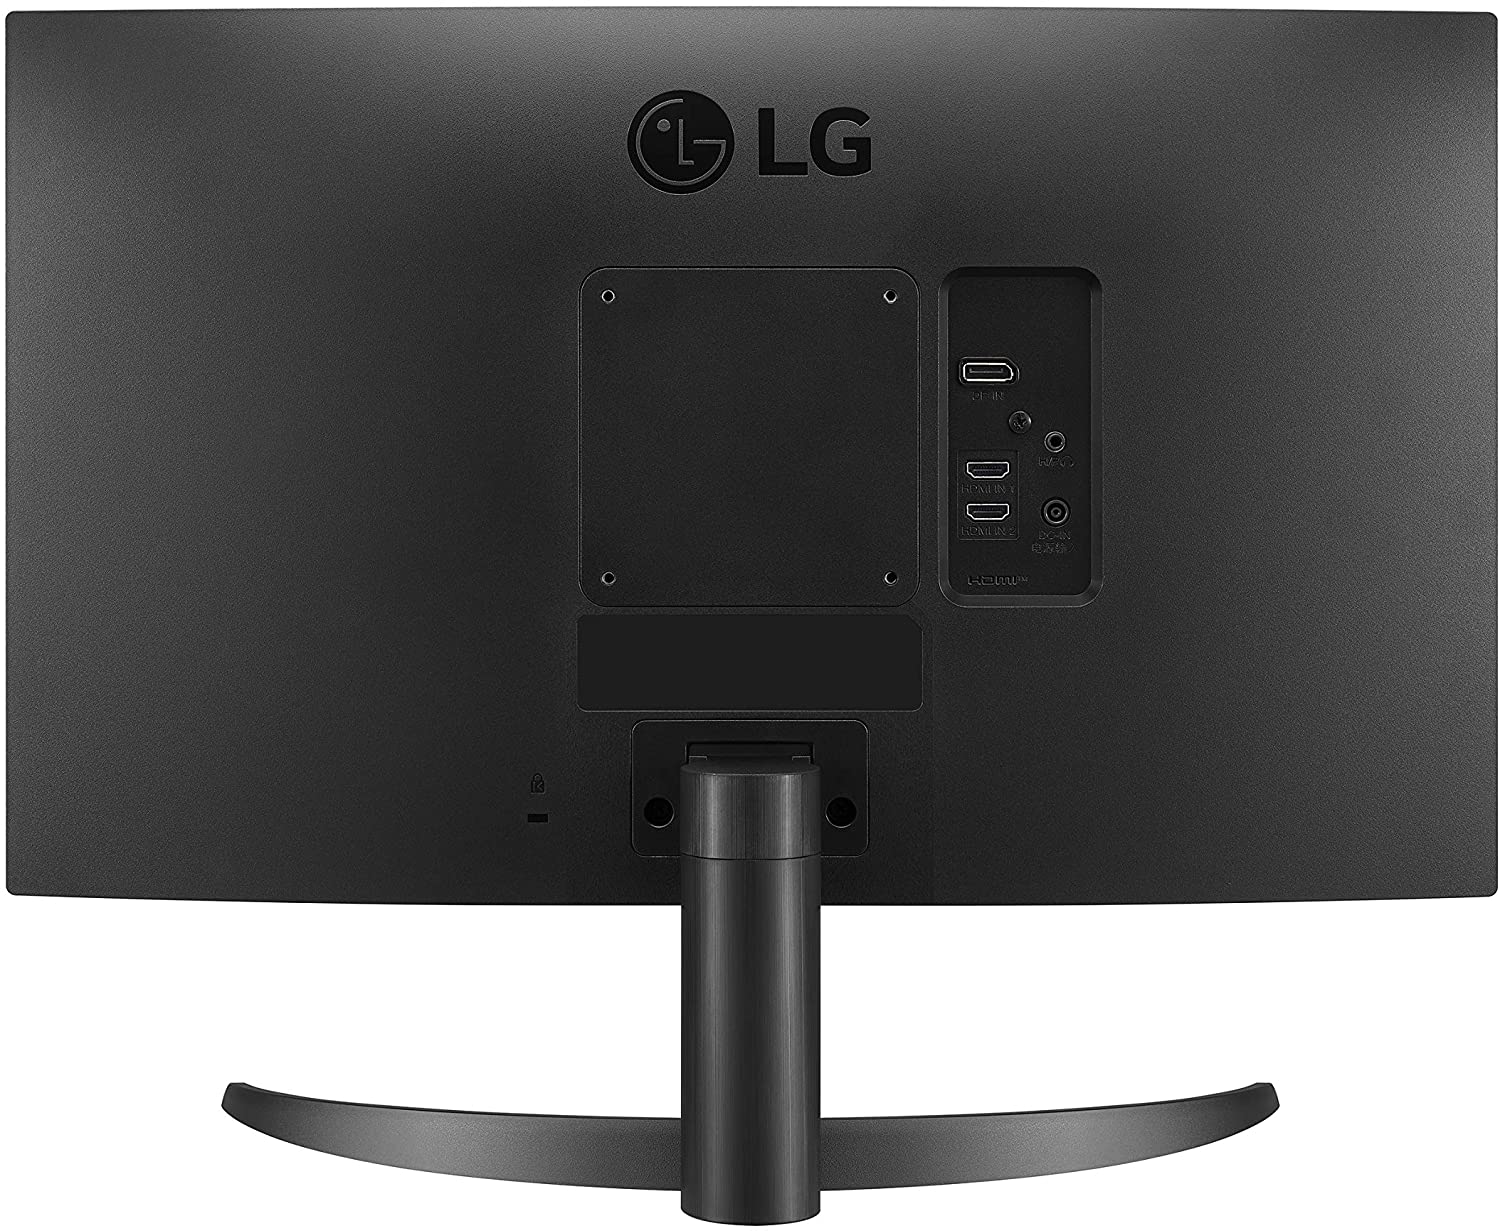 LG 24QP500-B Review | The cheapest 1440p monitor? - Reatbyte